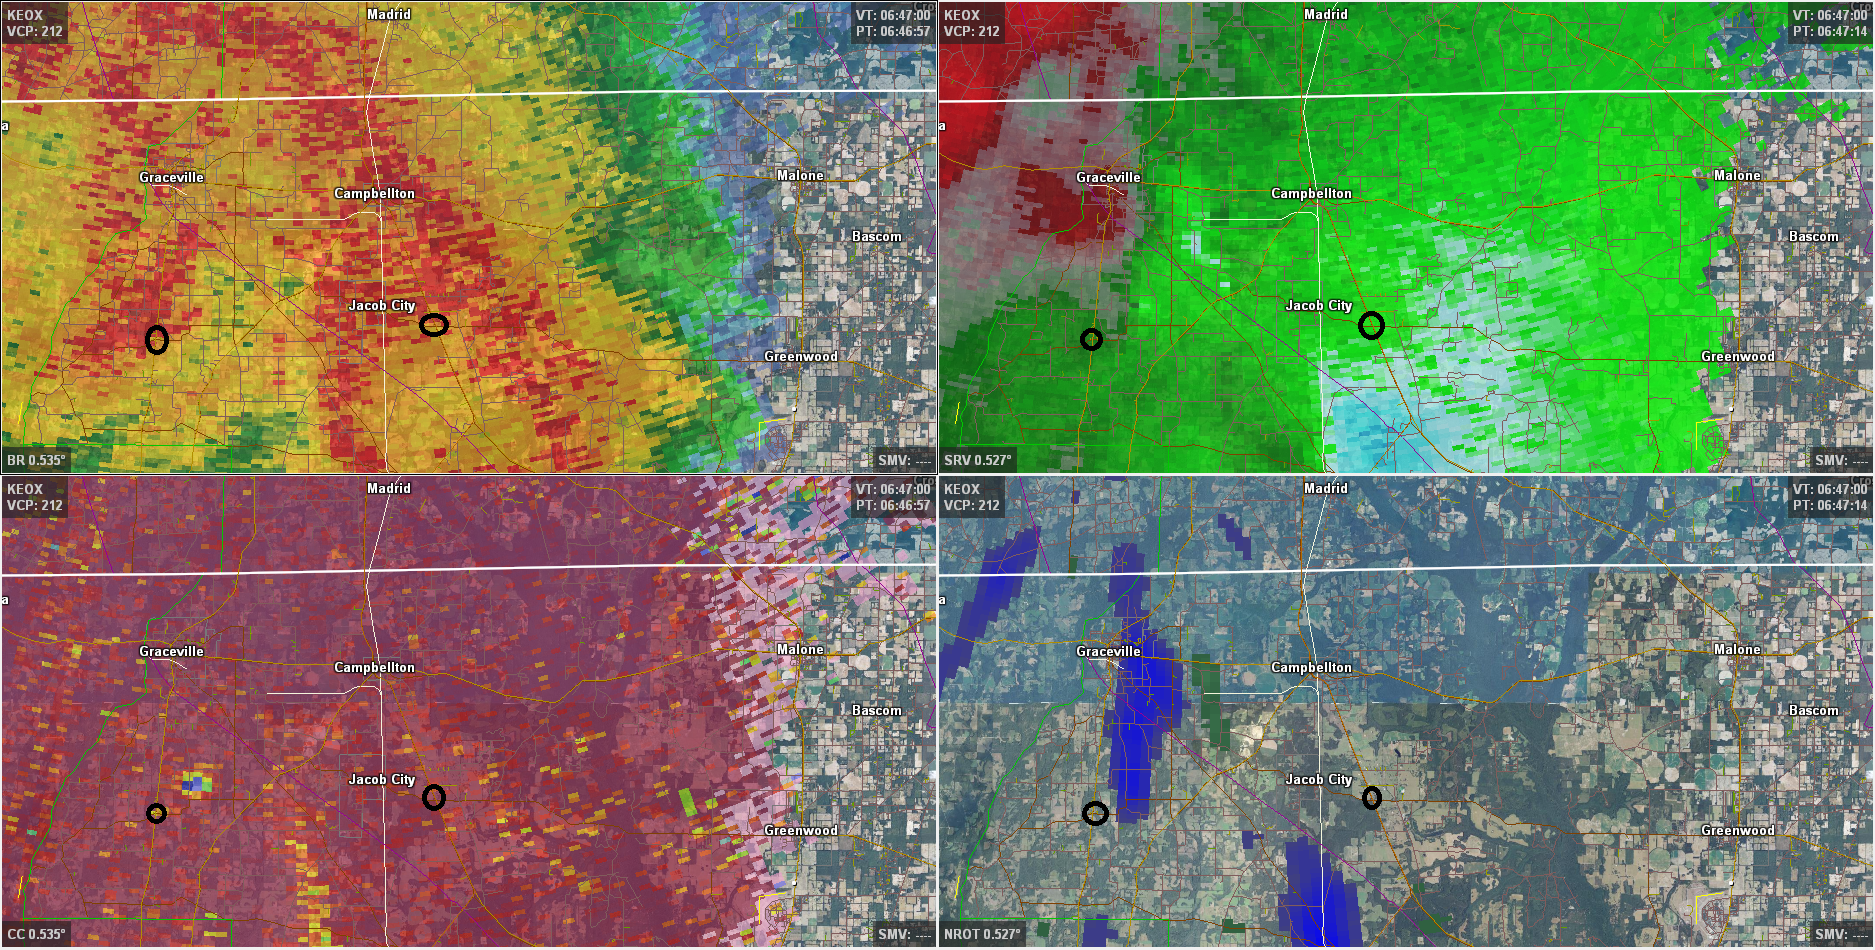 A 4-panel image from the Ft. Rucker, AL (KEOX) radar valid 0647 UTC 30 April 2014. Clockwise from top left, the images depict base reflectivity, storm-relative velocity, rotational velocity and correlation coefficient, all on the 0.5-degree slice. Damage areas are indicated by the black circles.